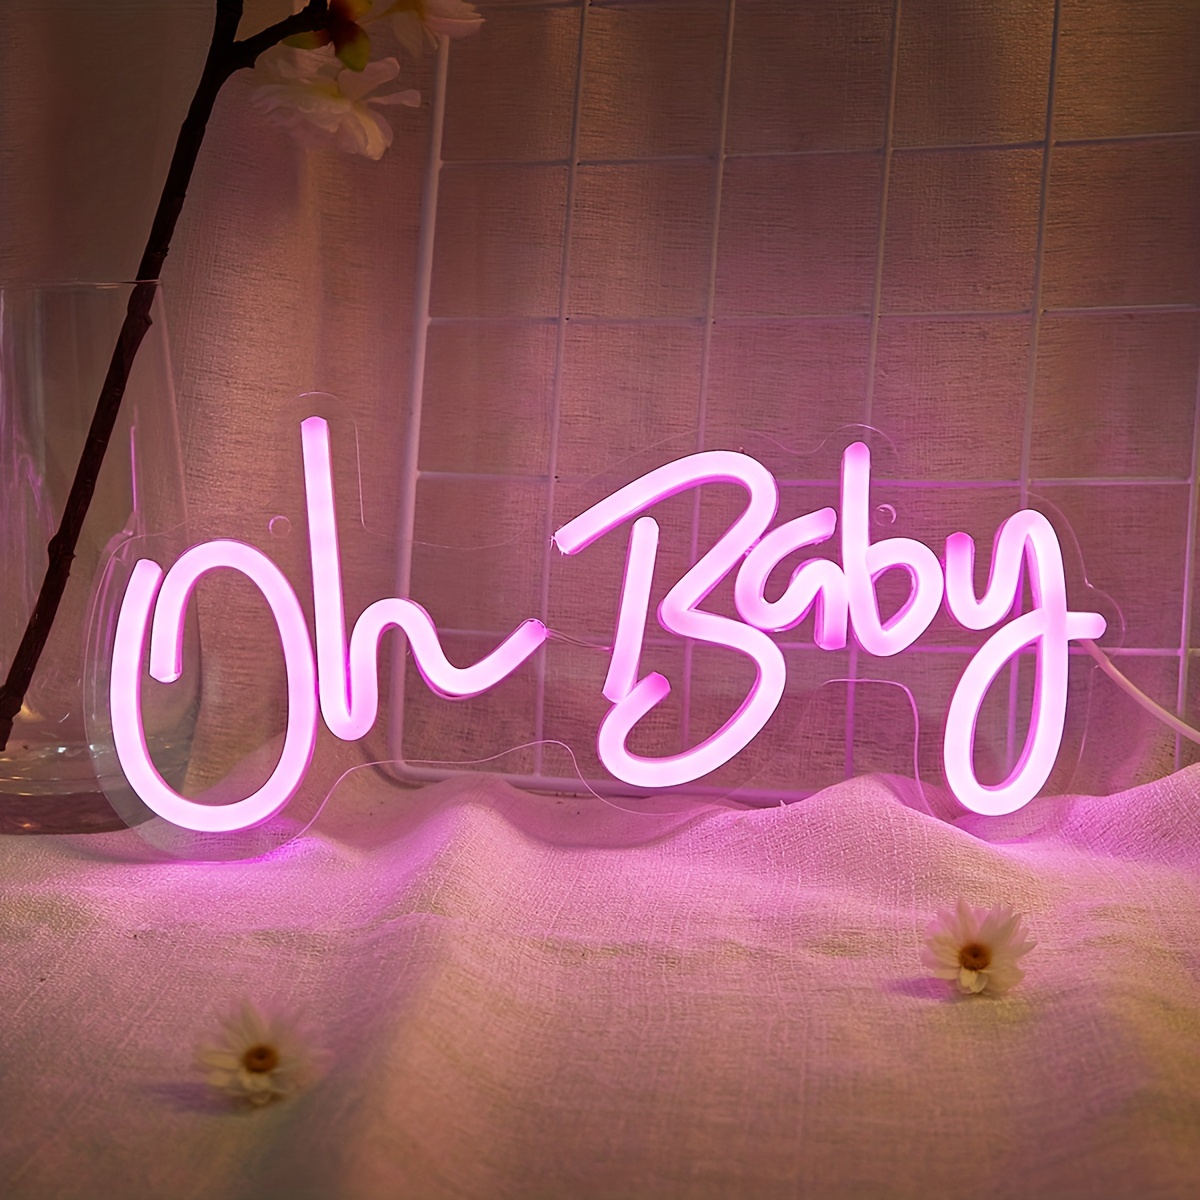 Oh Baby  Insegna Neon LED 